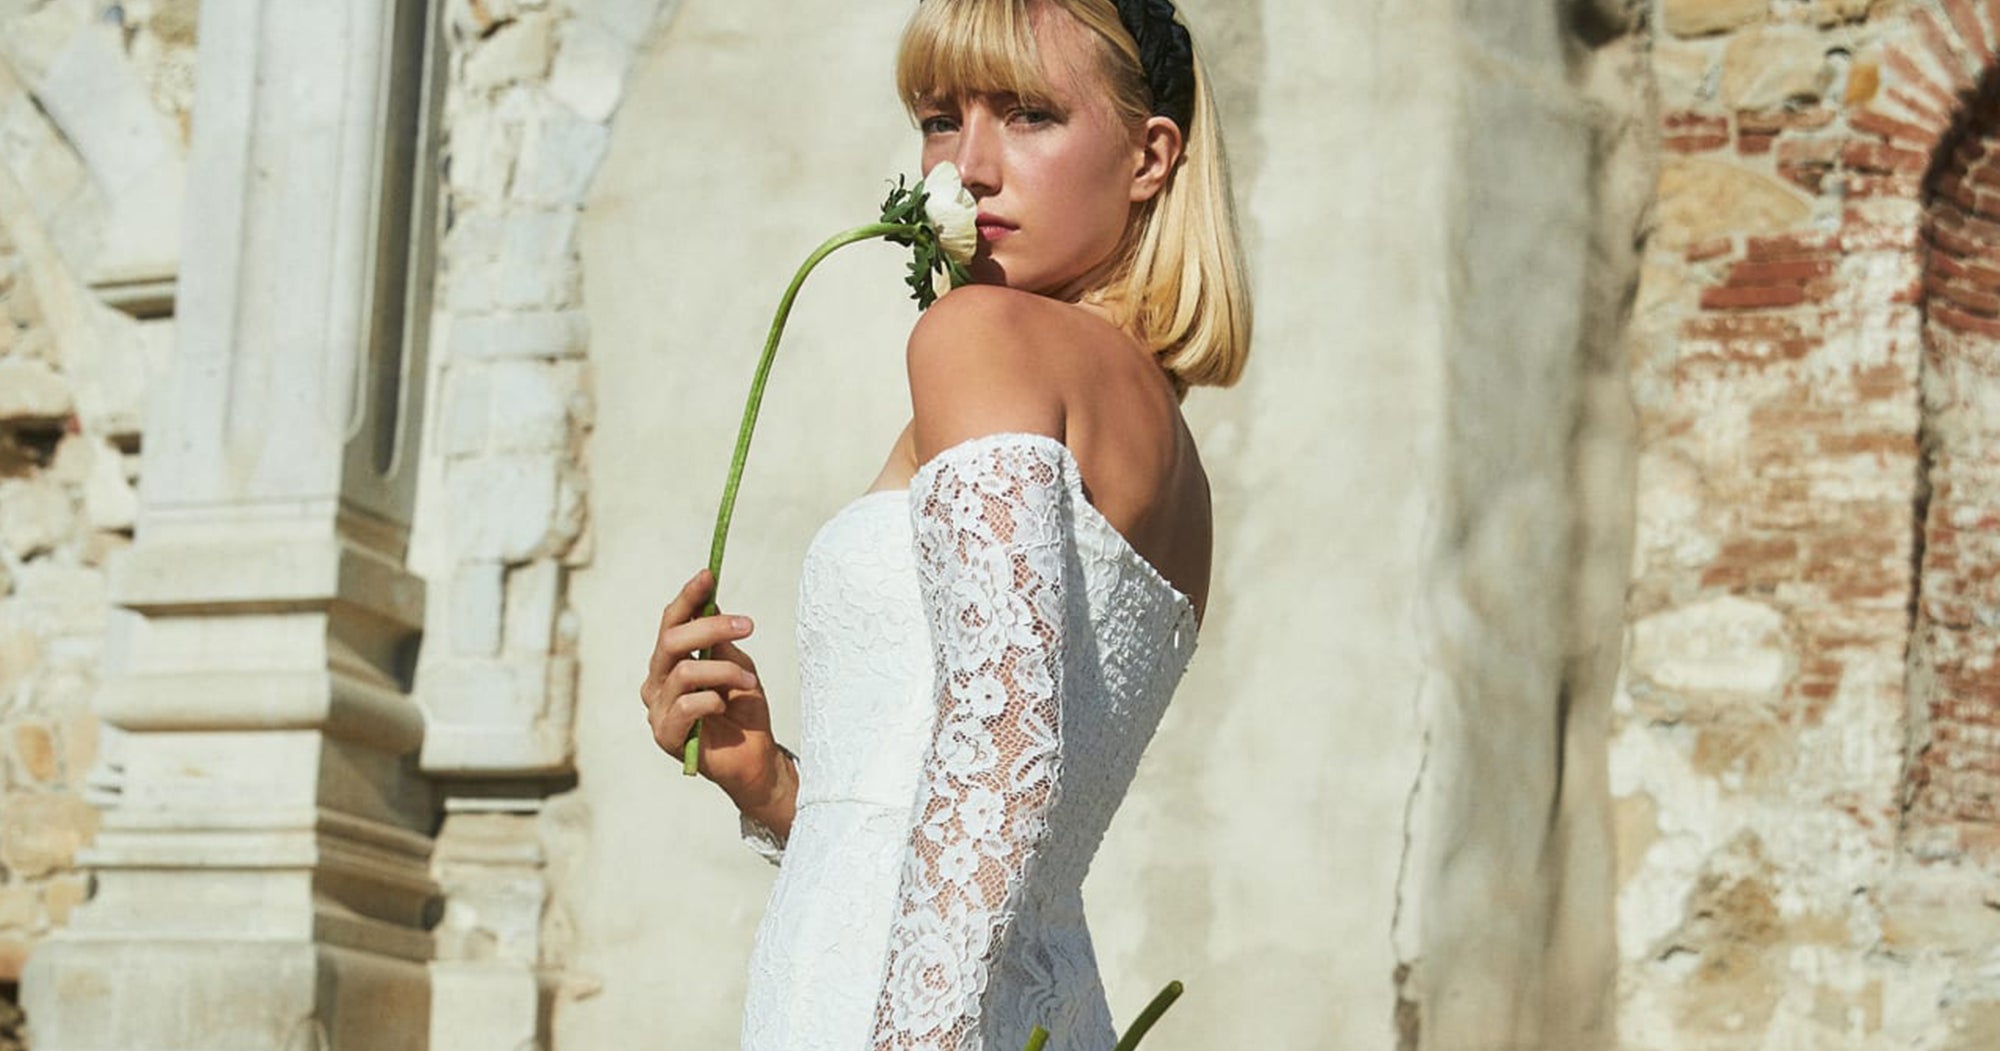 Affordable Wedding Dresses Under 1000 Don't Look Cheap